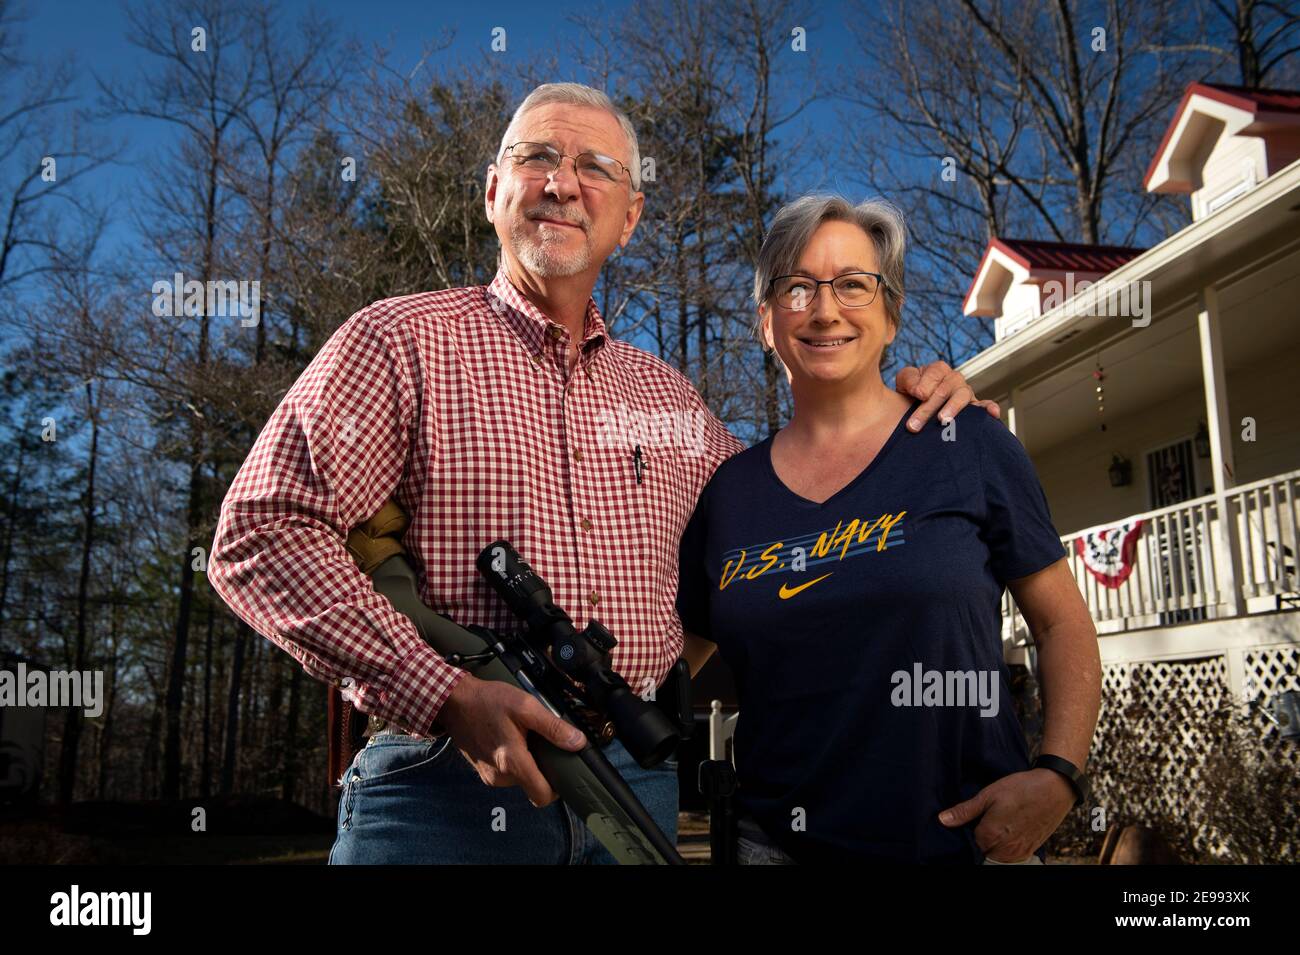 Jasper, GA, USA. 3rd Feb, 2021. Jerry Daniels and his wife Laura, both Navy veterans, registered Republicans and gun owners, at their Jasper, Georgia home. Both insist conservatives are still the core of Georgia voters, despite recent elections which they maintain were neither honest nor fair. 'I believe we are the working backbone of Georgia, ' he said. They are saddened by the mediaÃs unflattering image of conservatives. 'We have been referred to as Ã”people clinging to our guns and bibles, or characterized as Ã”basket of deplorables,Ã' he said, angered that federal agents reported Stock Photo